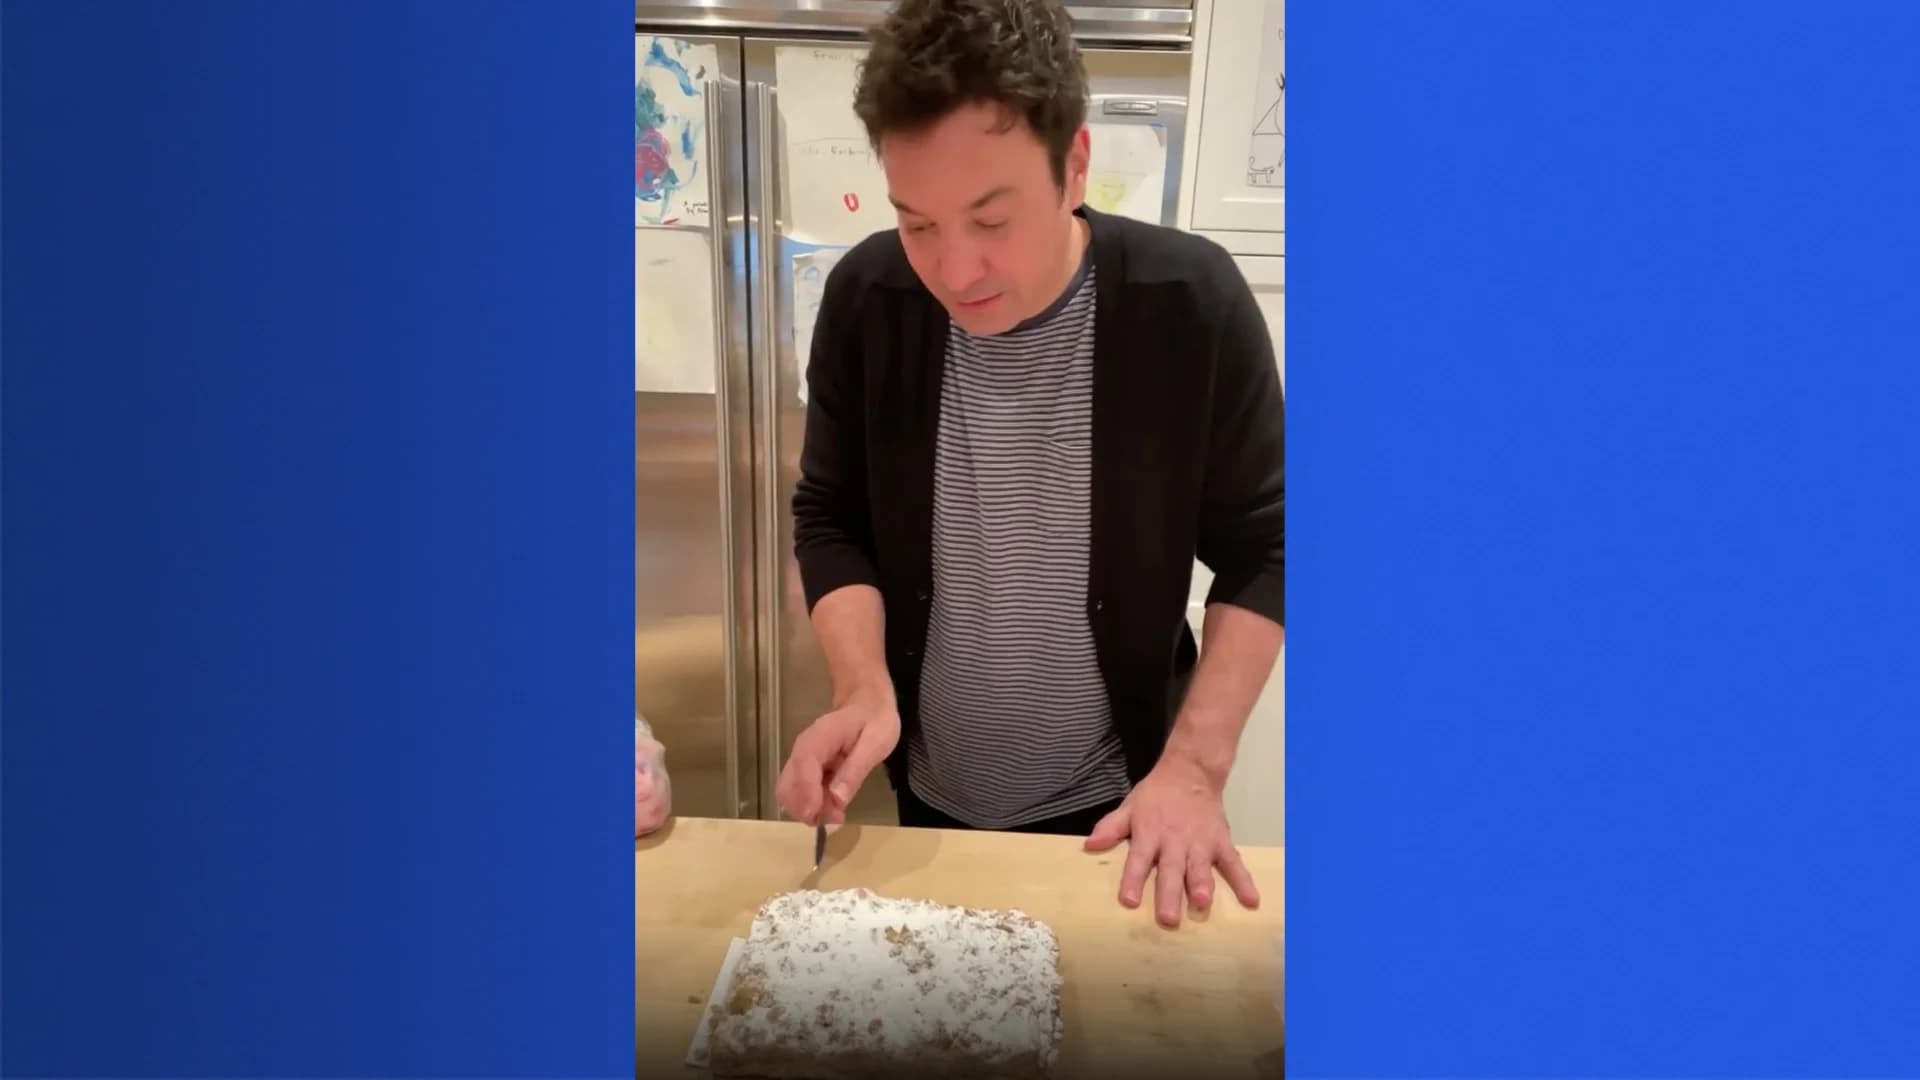 New Jersey bakery receives shoutout from Jimmy Fallon over famous crumb cake